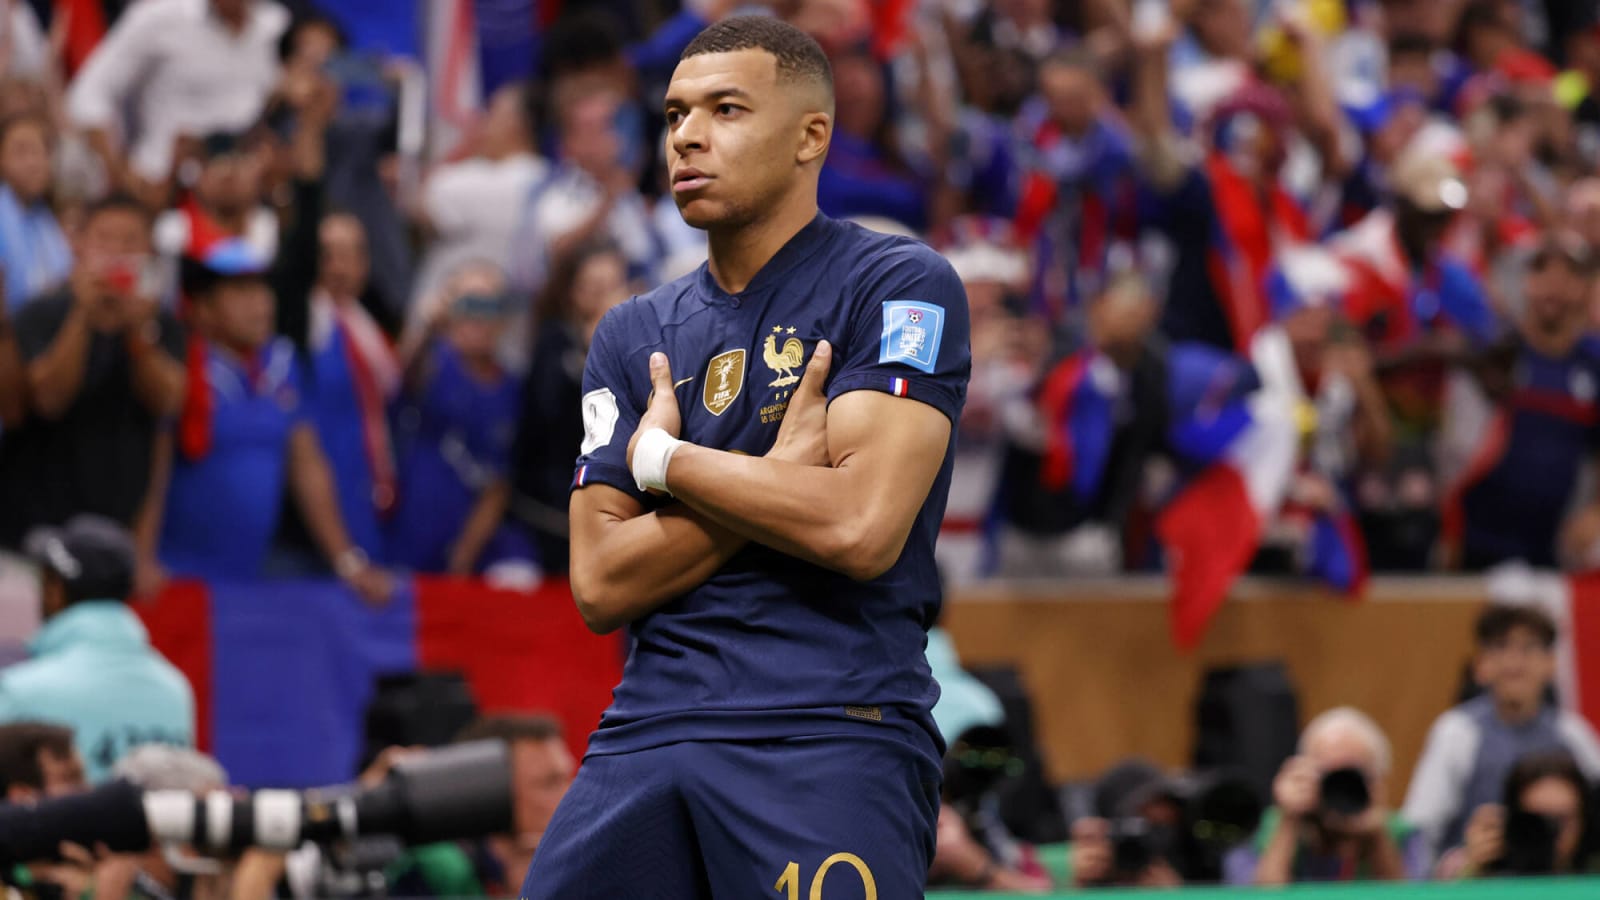 Kylian Mbappe breaks silence on whether he’ll compete at the Paris Olympics or not for France